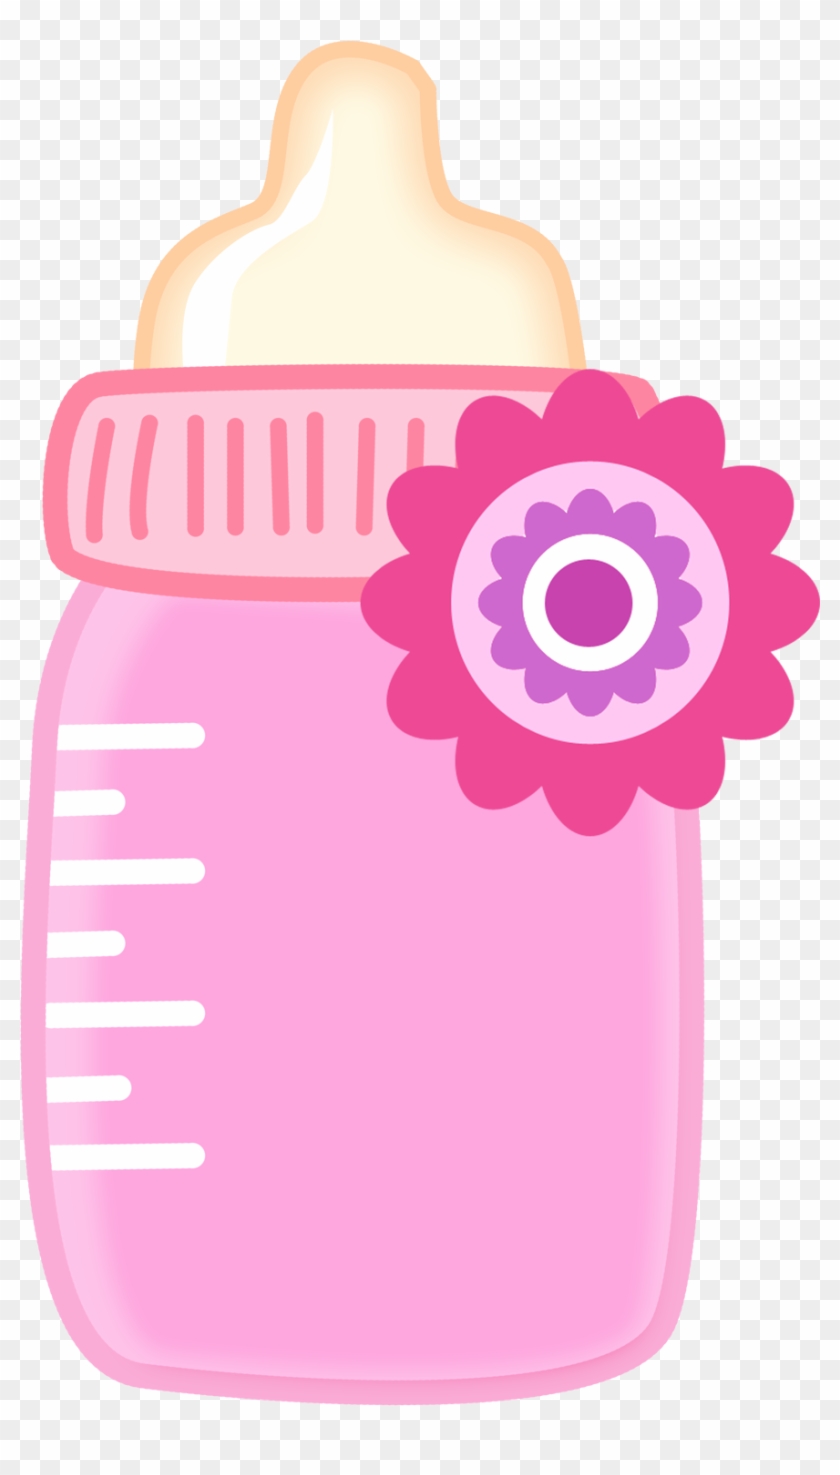 Baby bottle Clip art pictures baby girl bottle clipart free